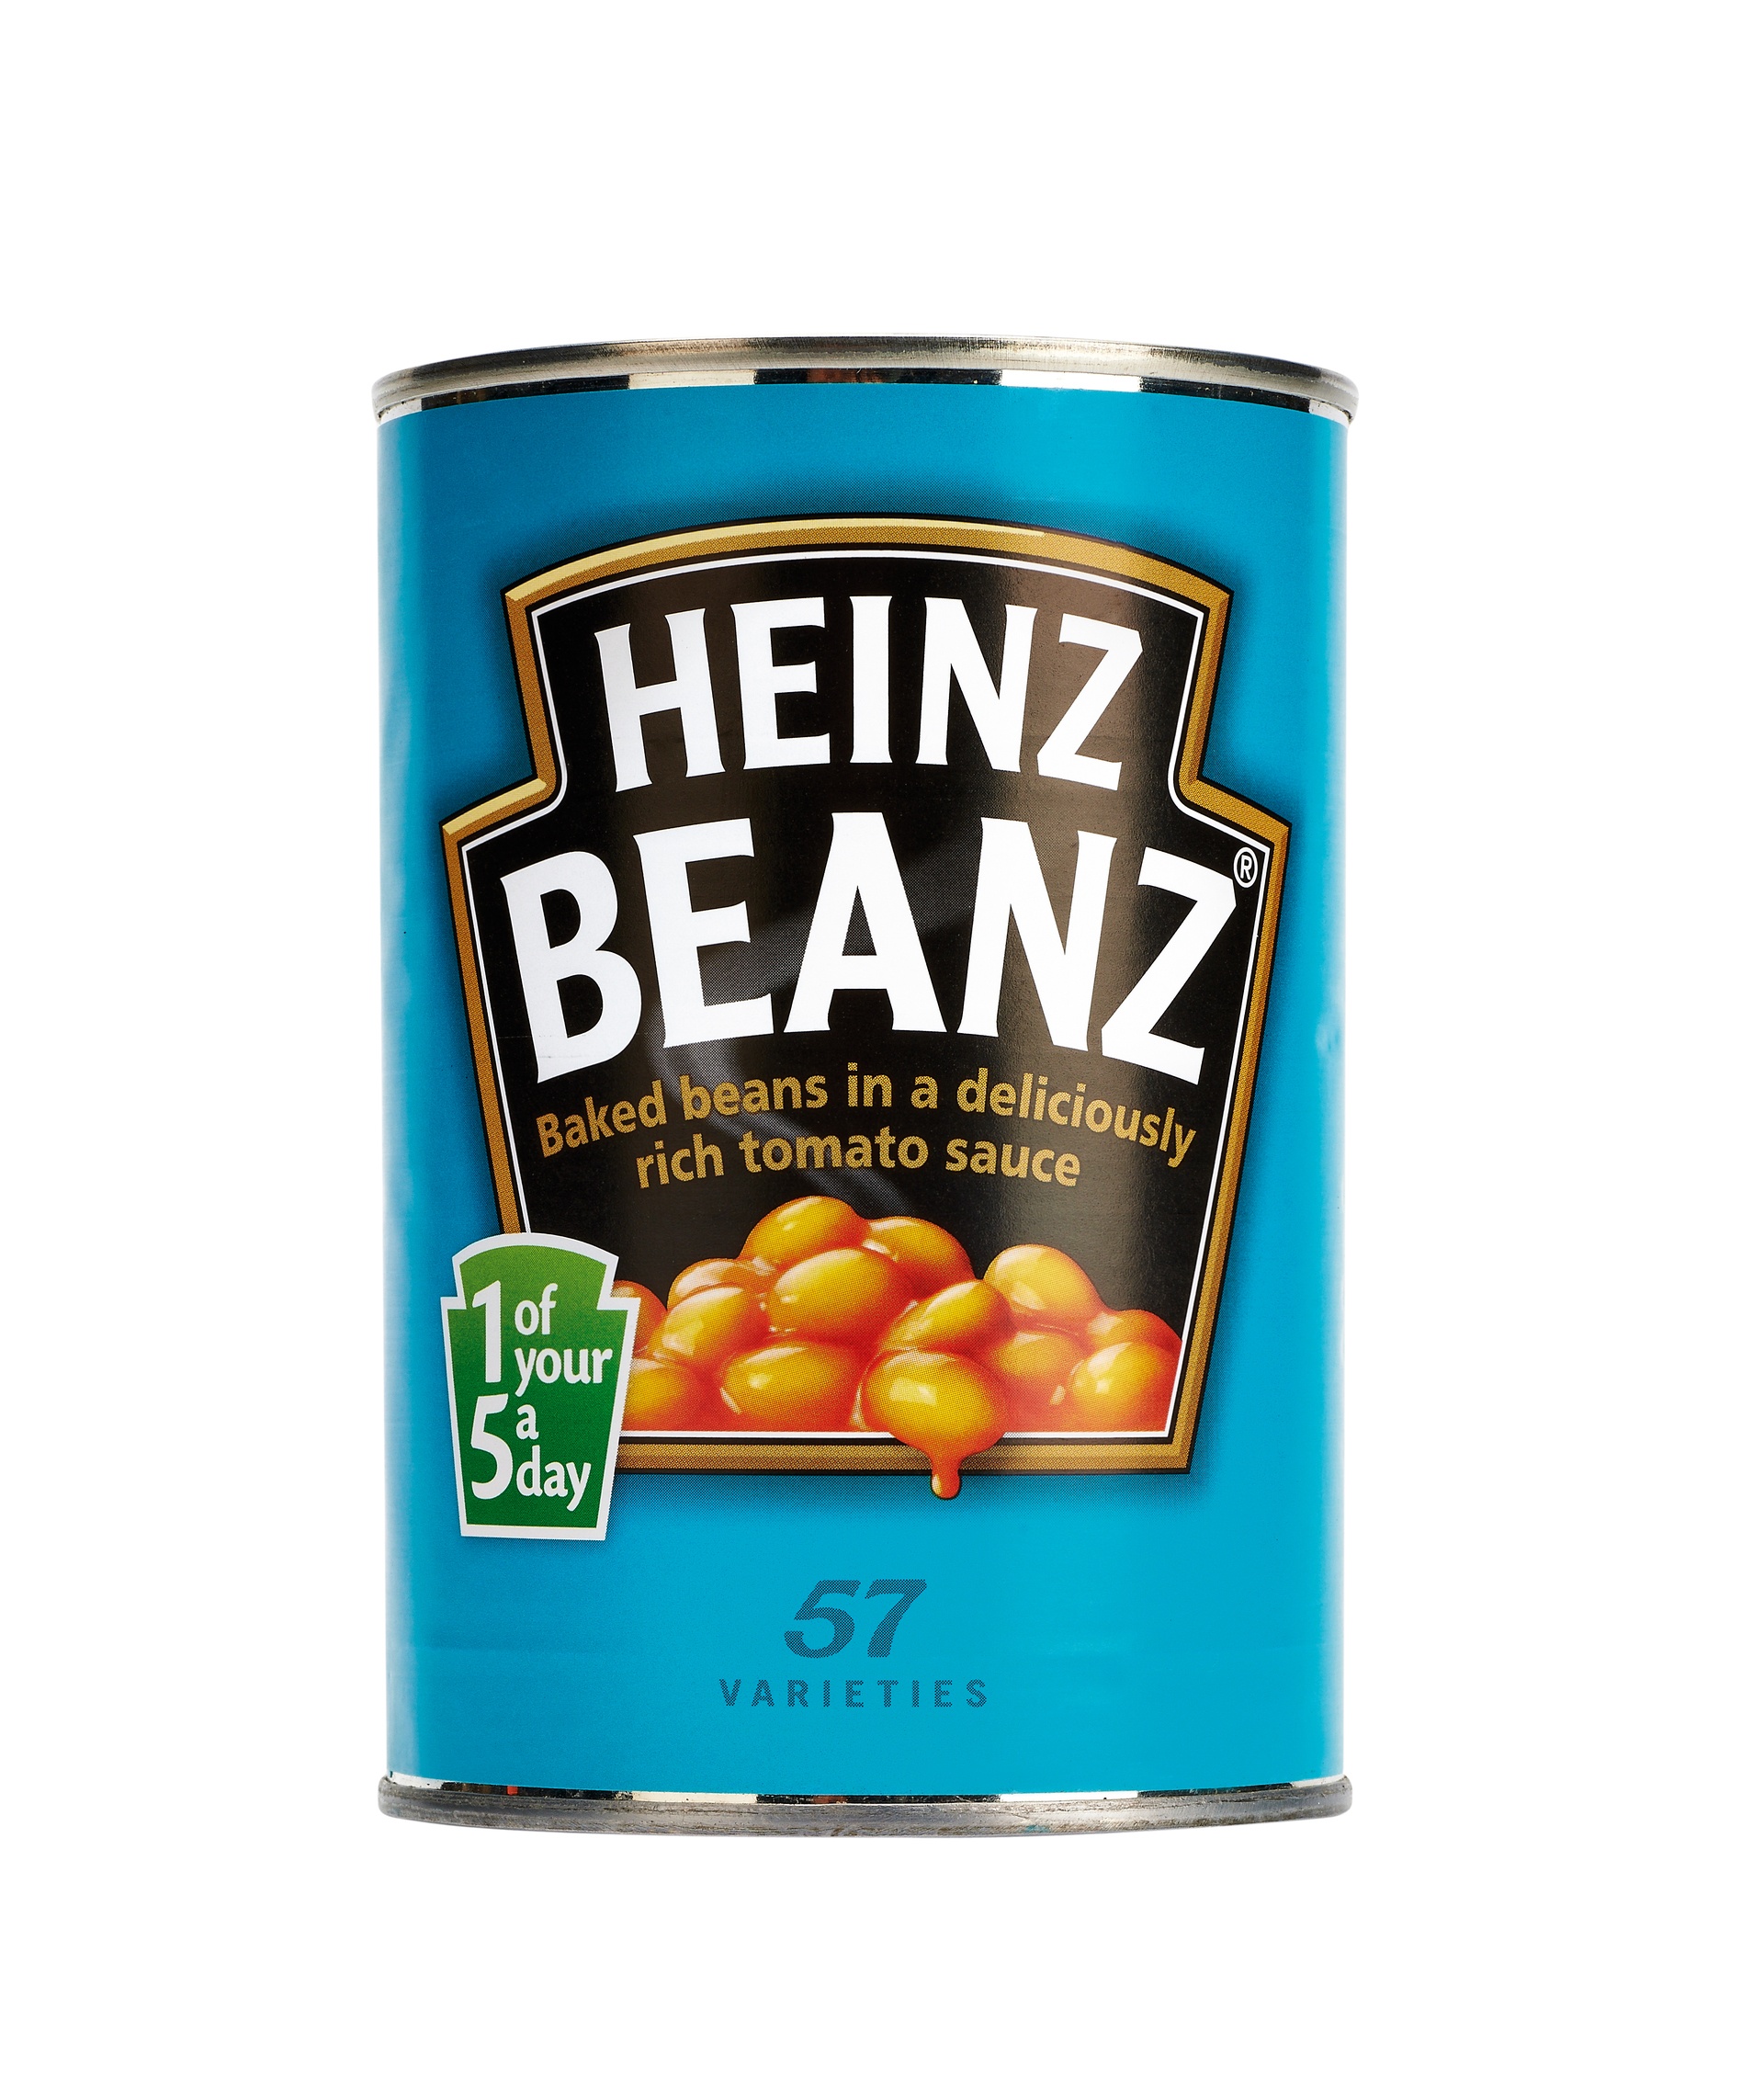 Heinz baked beans were the most expensive of the range, costing £1.39 per 415g tin.